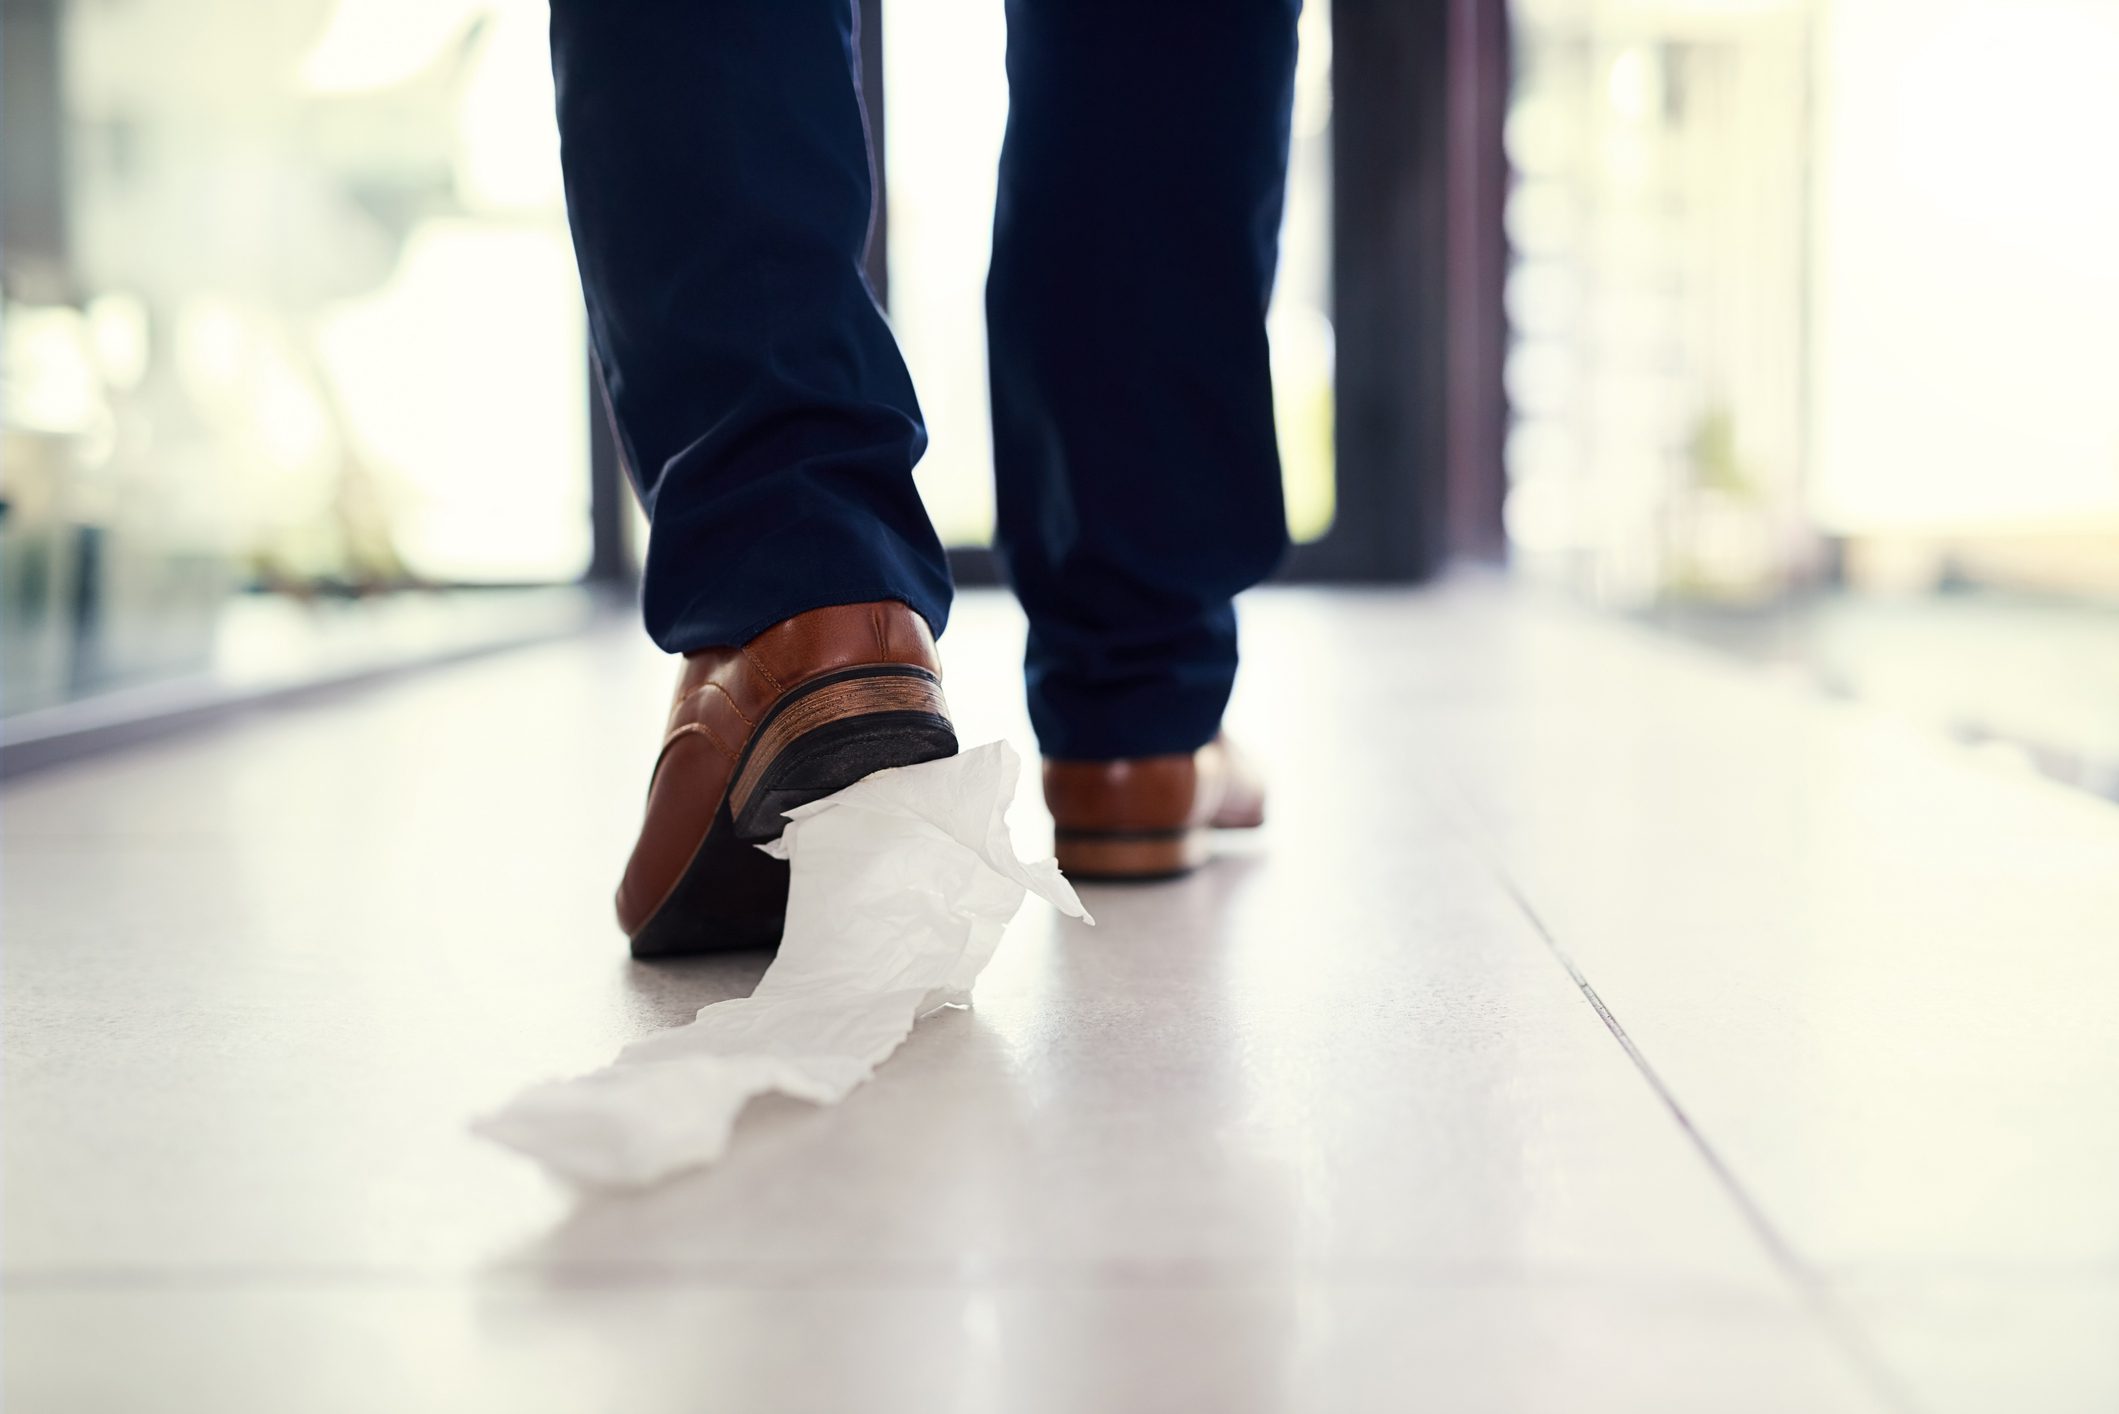 Closeup shot of a businessman walking in an office with toilet paper stuck to his shoe